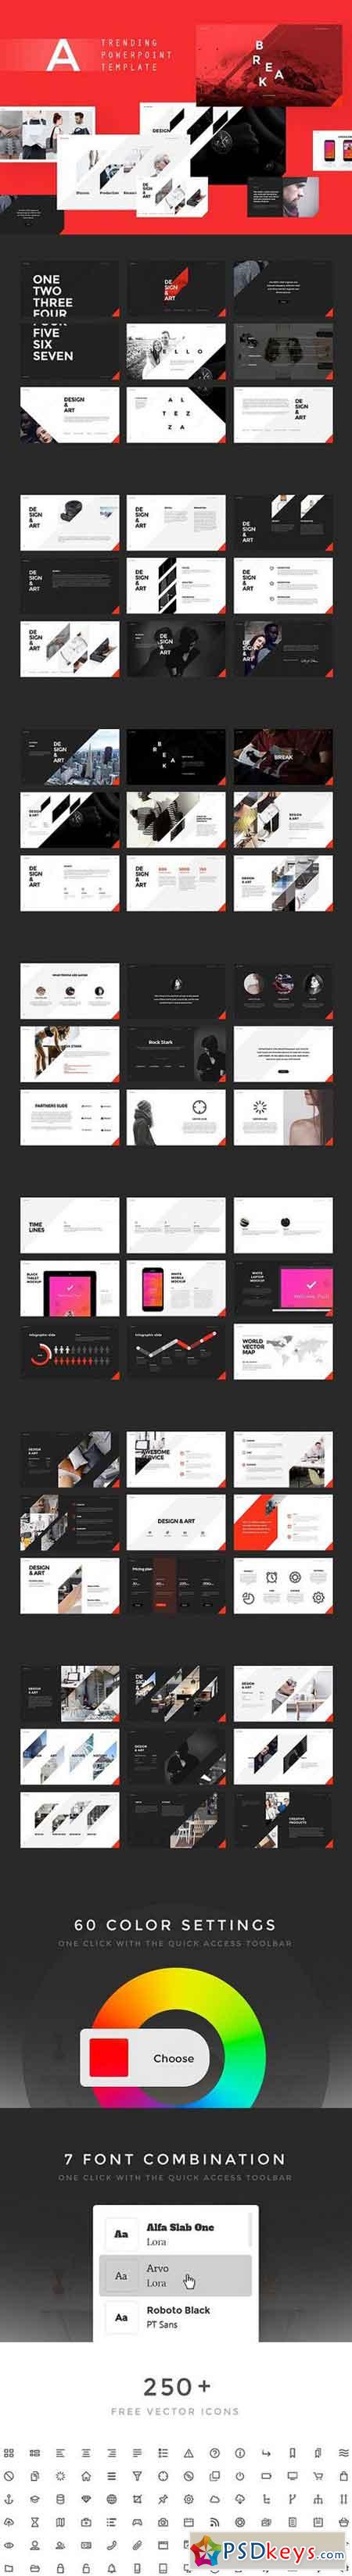 ALTEZZA PowerPoint Template 931176